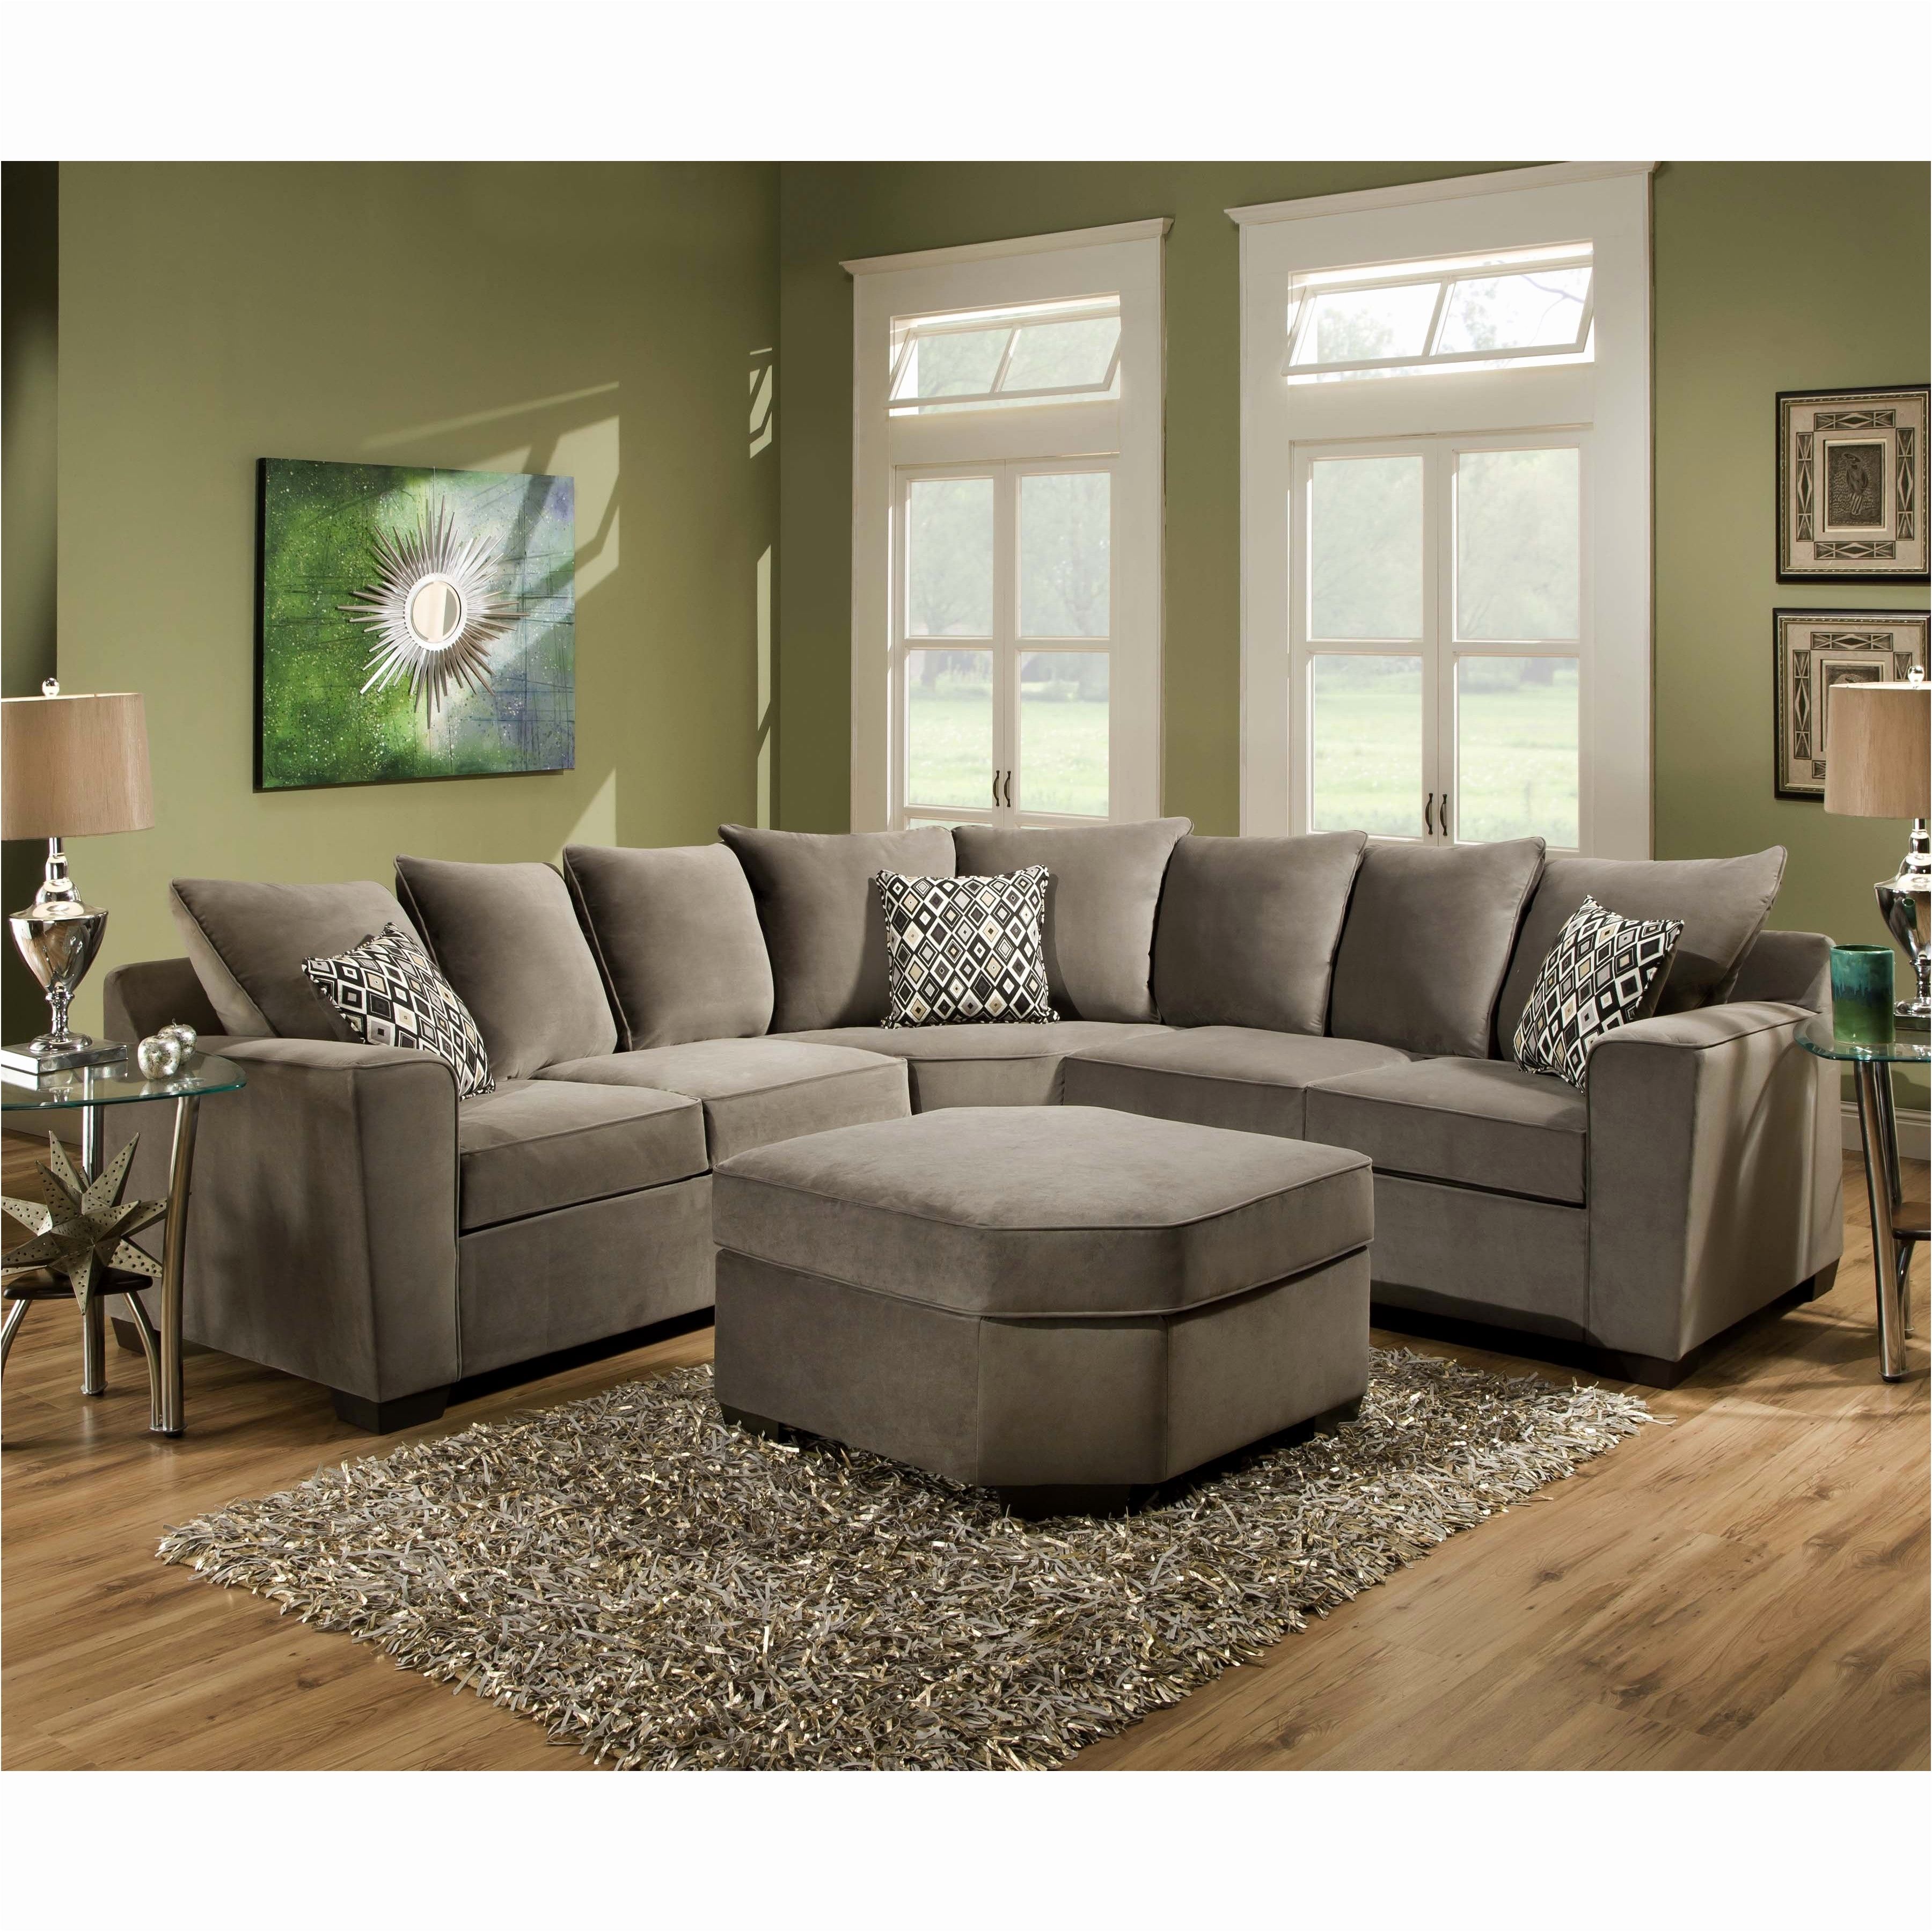 Elegant Cheap Sofas And Couches Inspirational – Intuisiblog Within Sears Sofas (Photo 9 of 10)